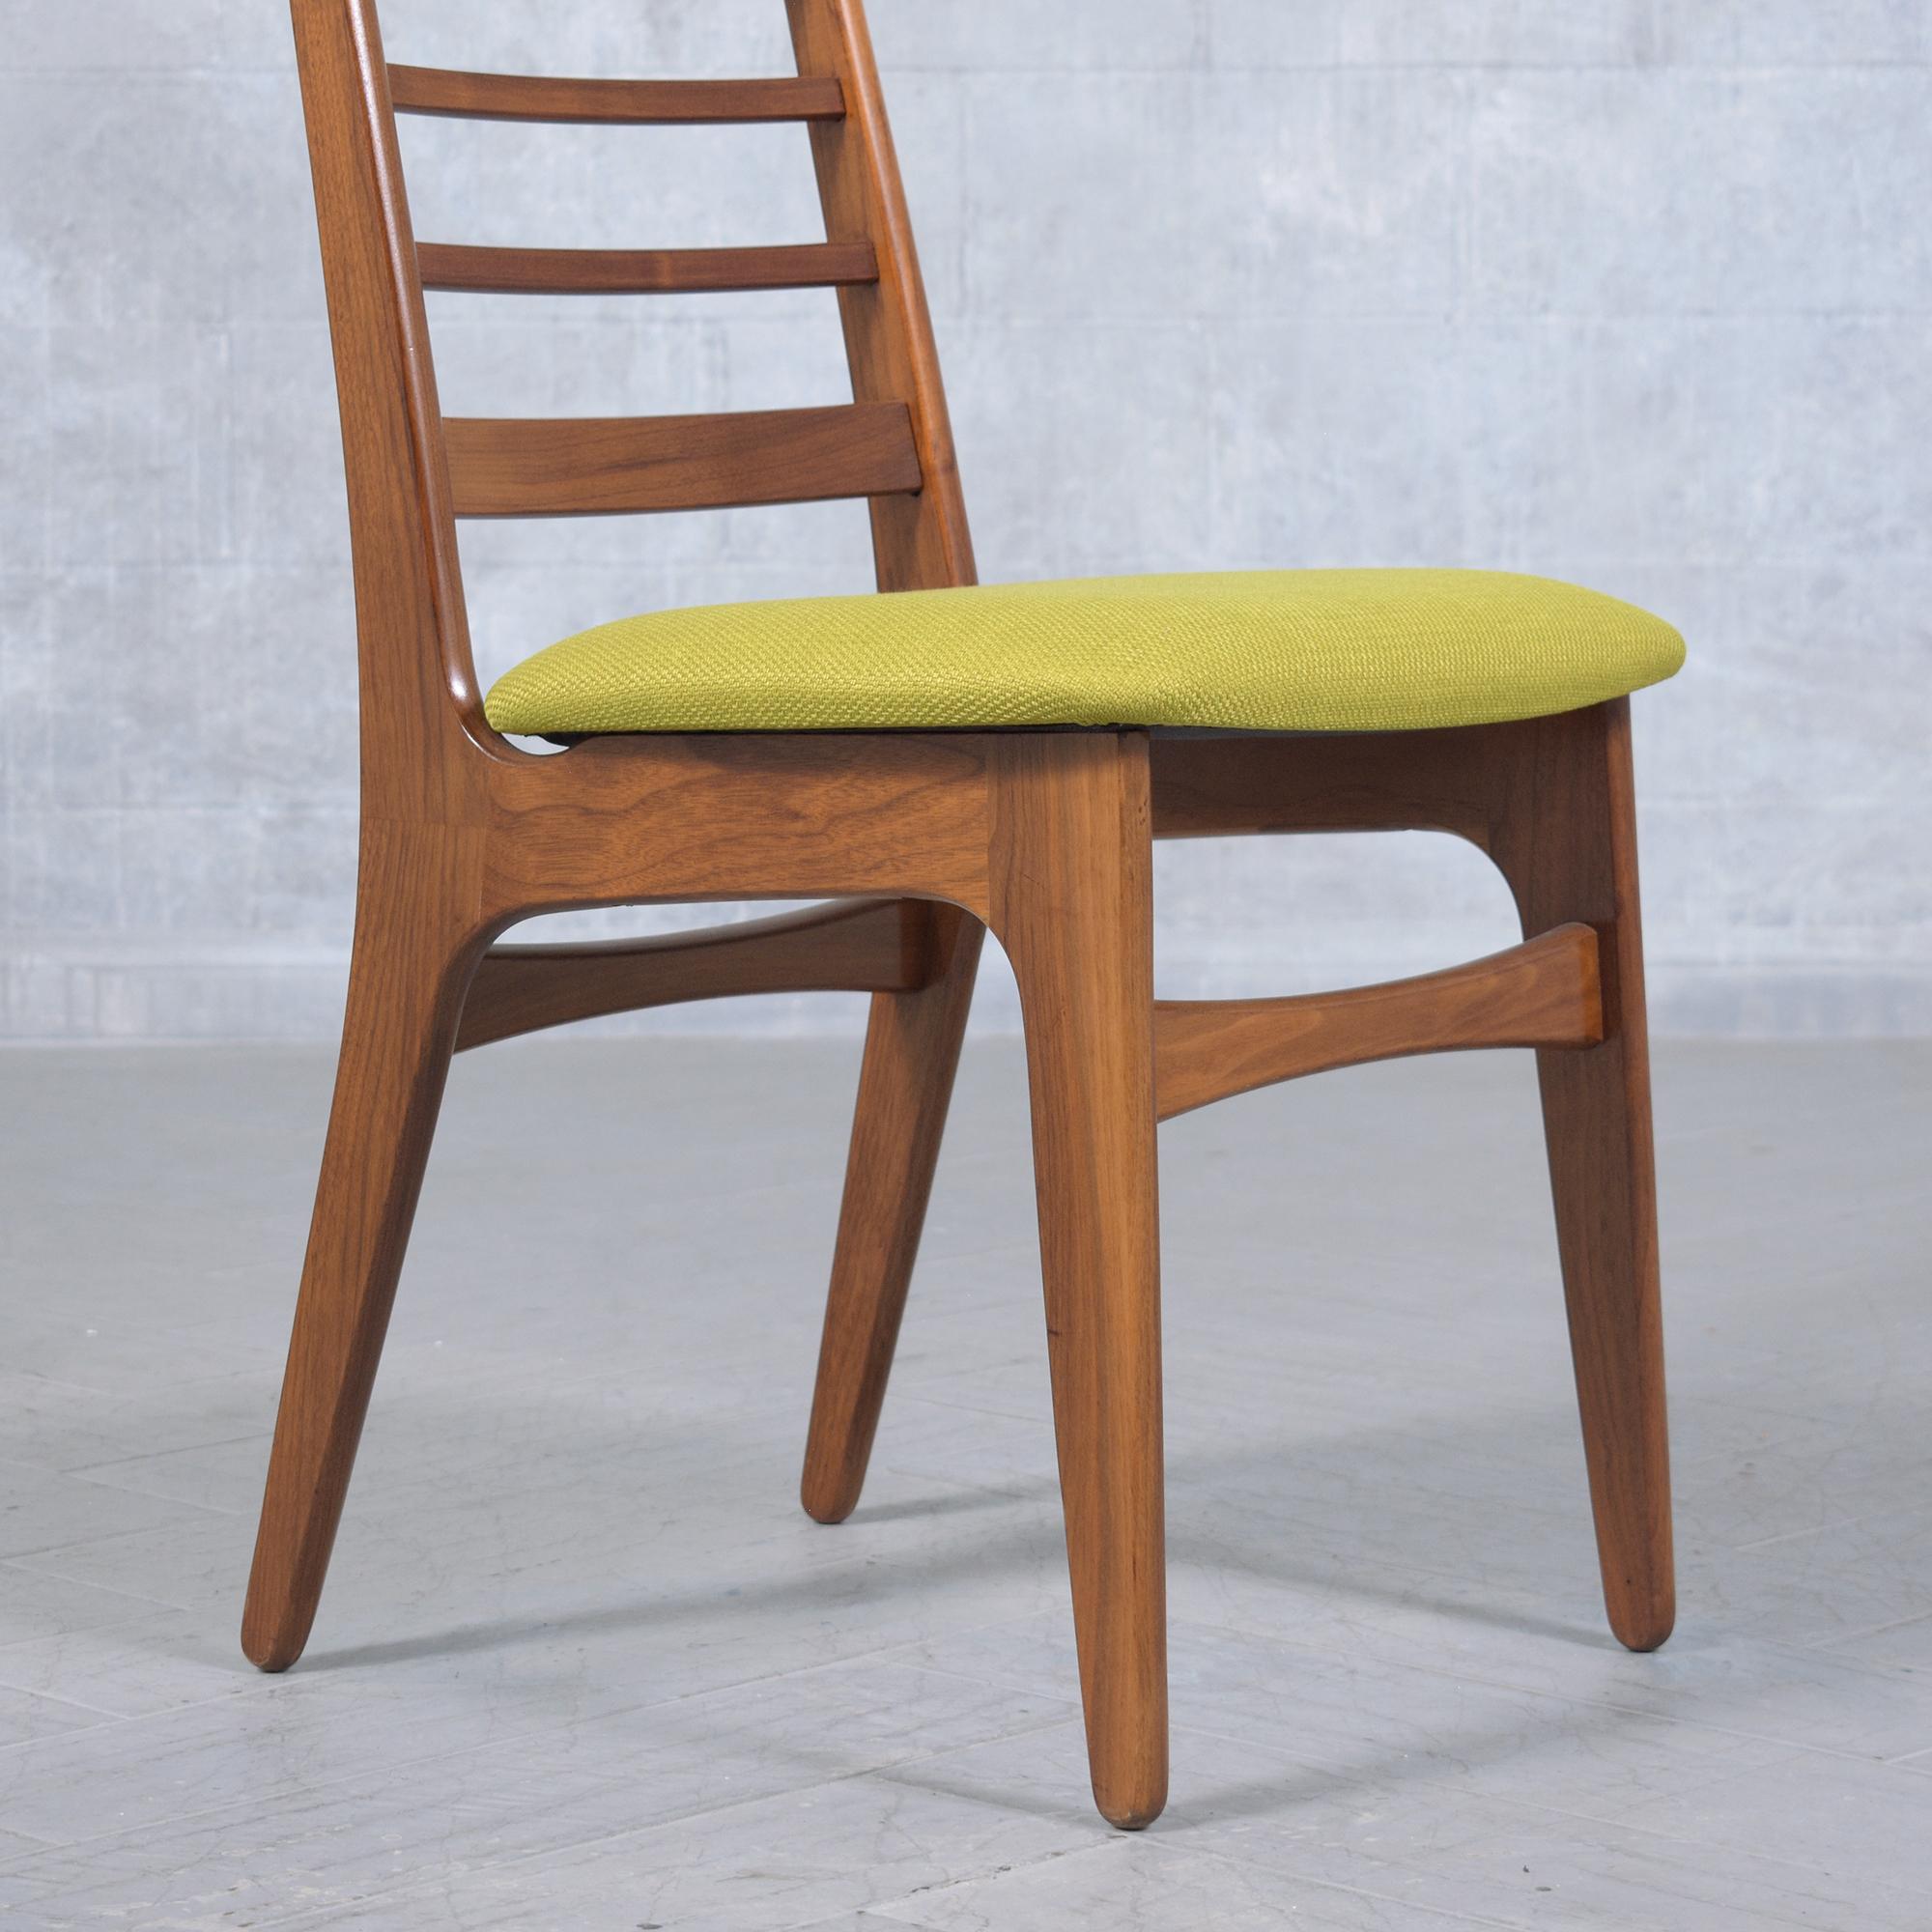 1960s Danish Modern Teak Chair in Walnut Finish with Green Fabric Upholstery For Sale 5